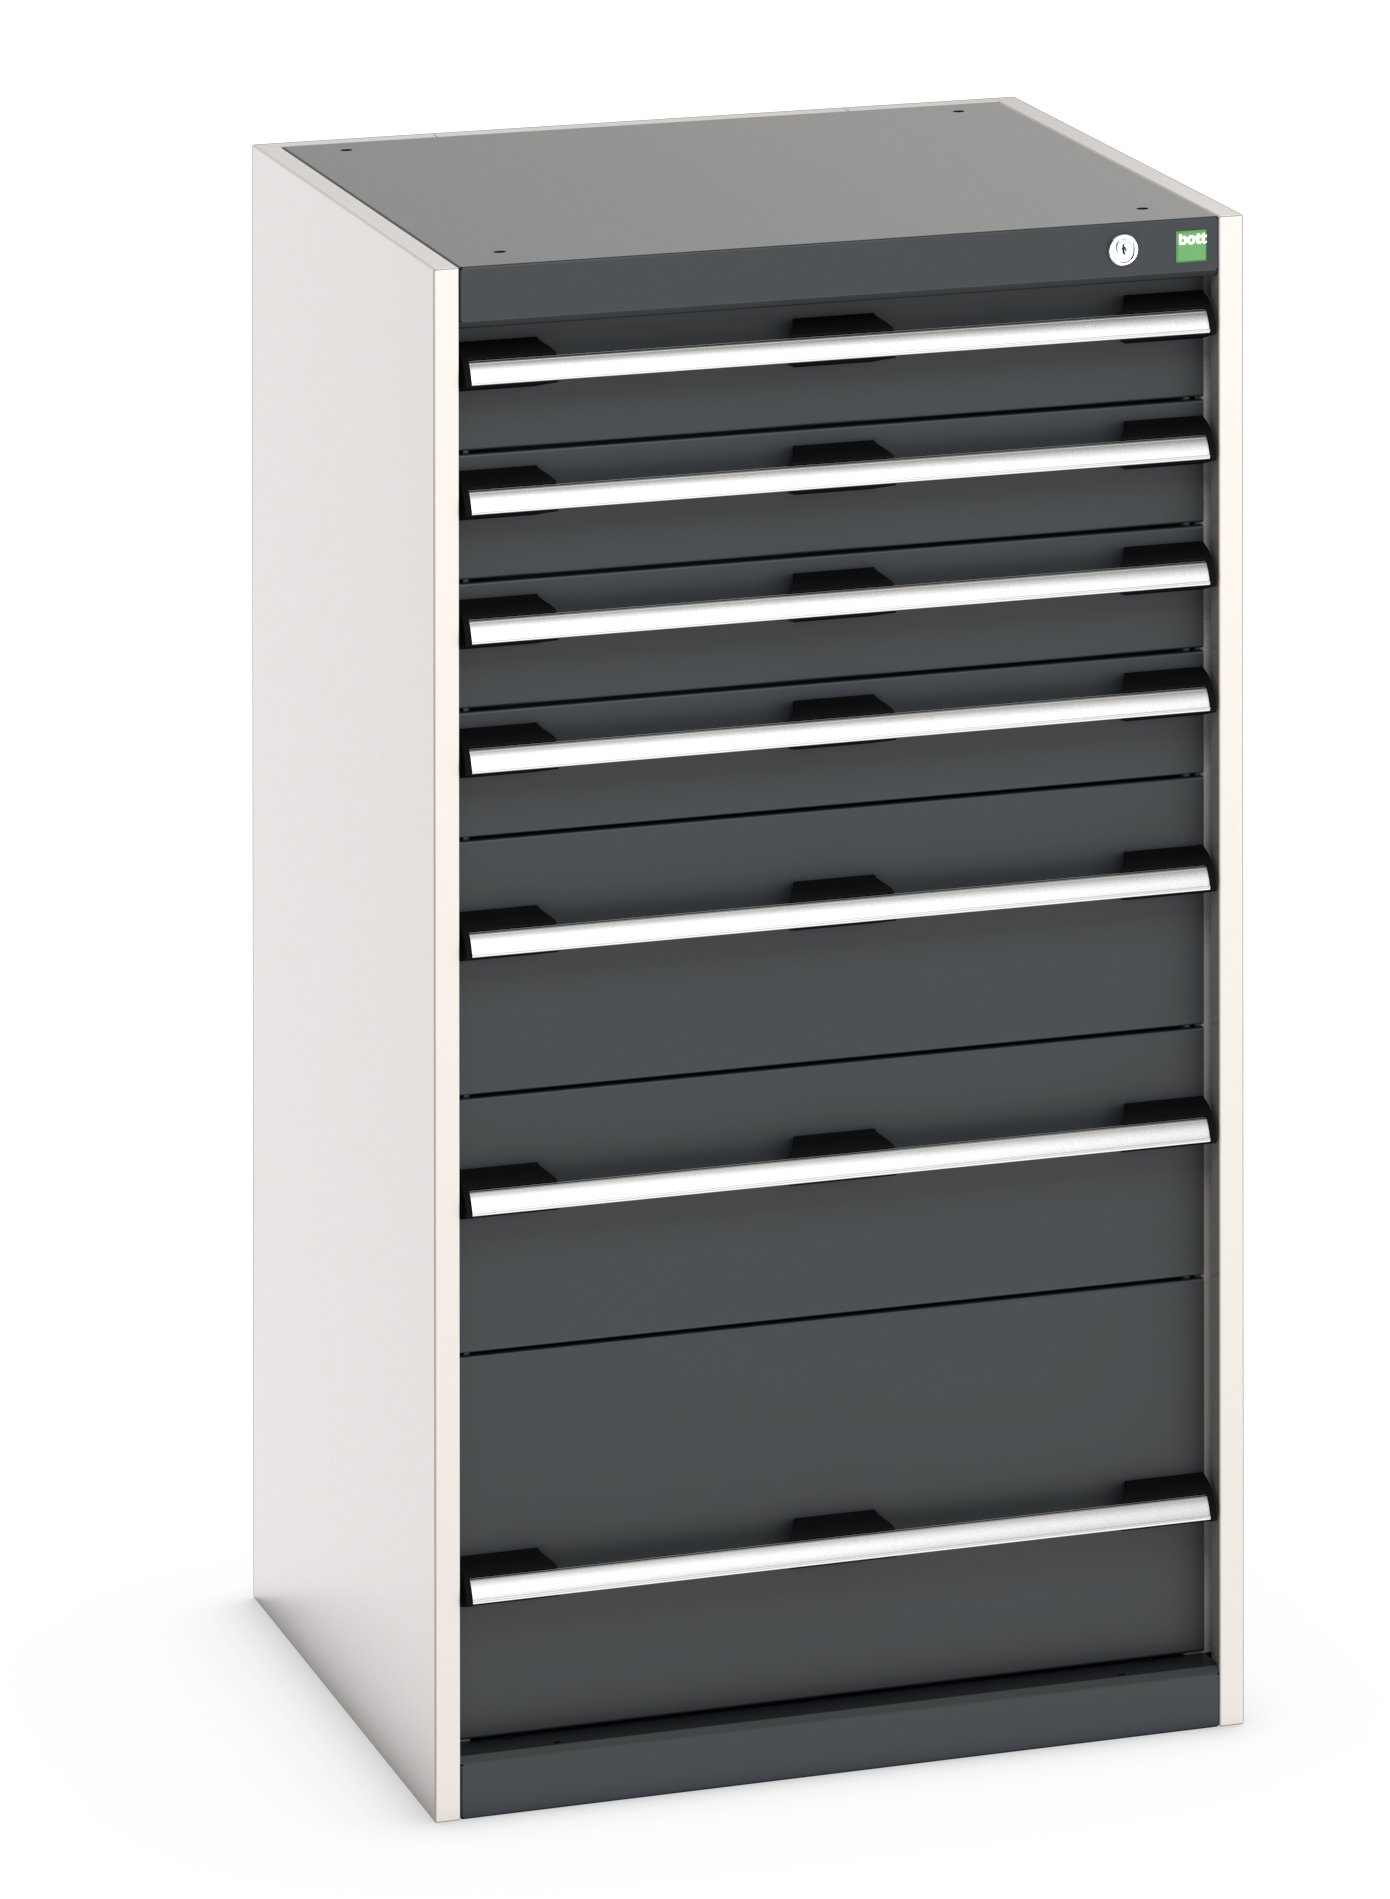 Bott Cubio Drawer Cabinet With 7 Drawers - 40019069.19V